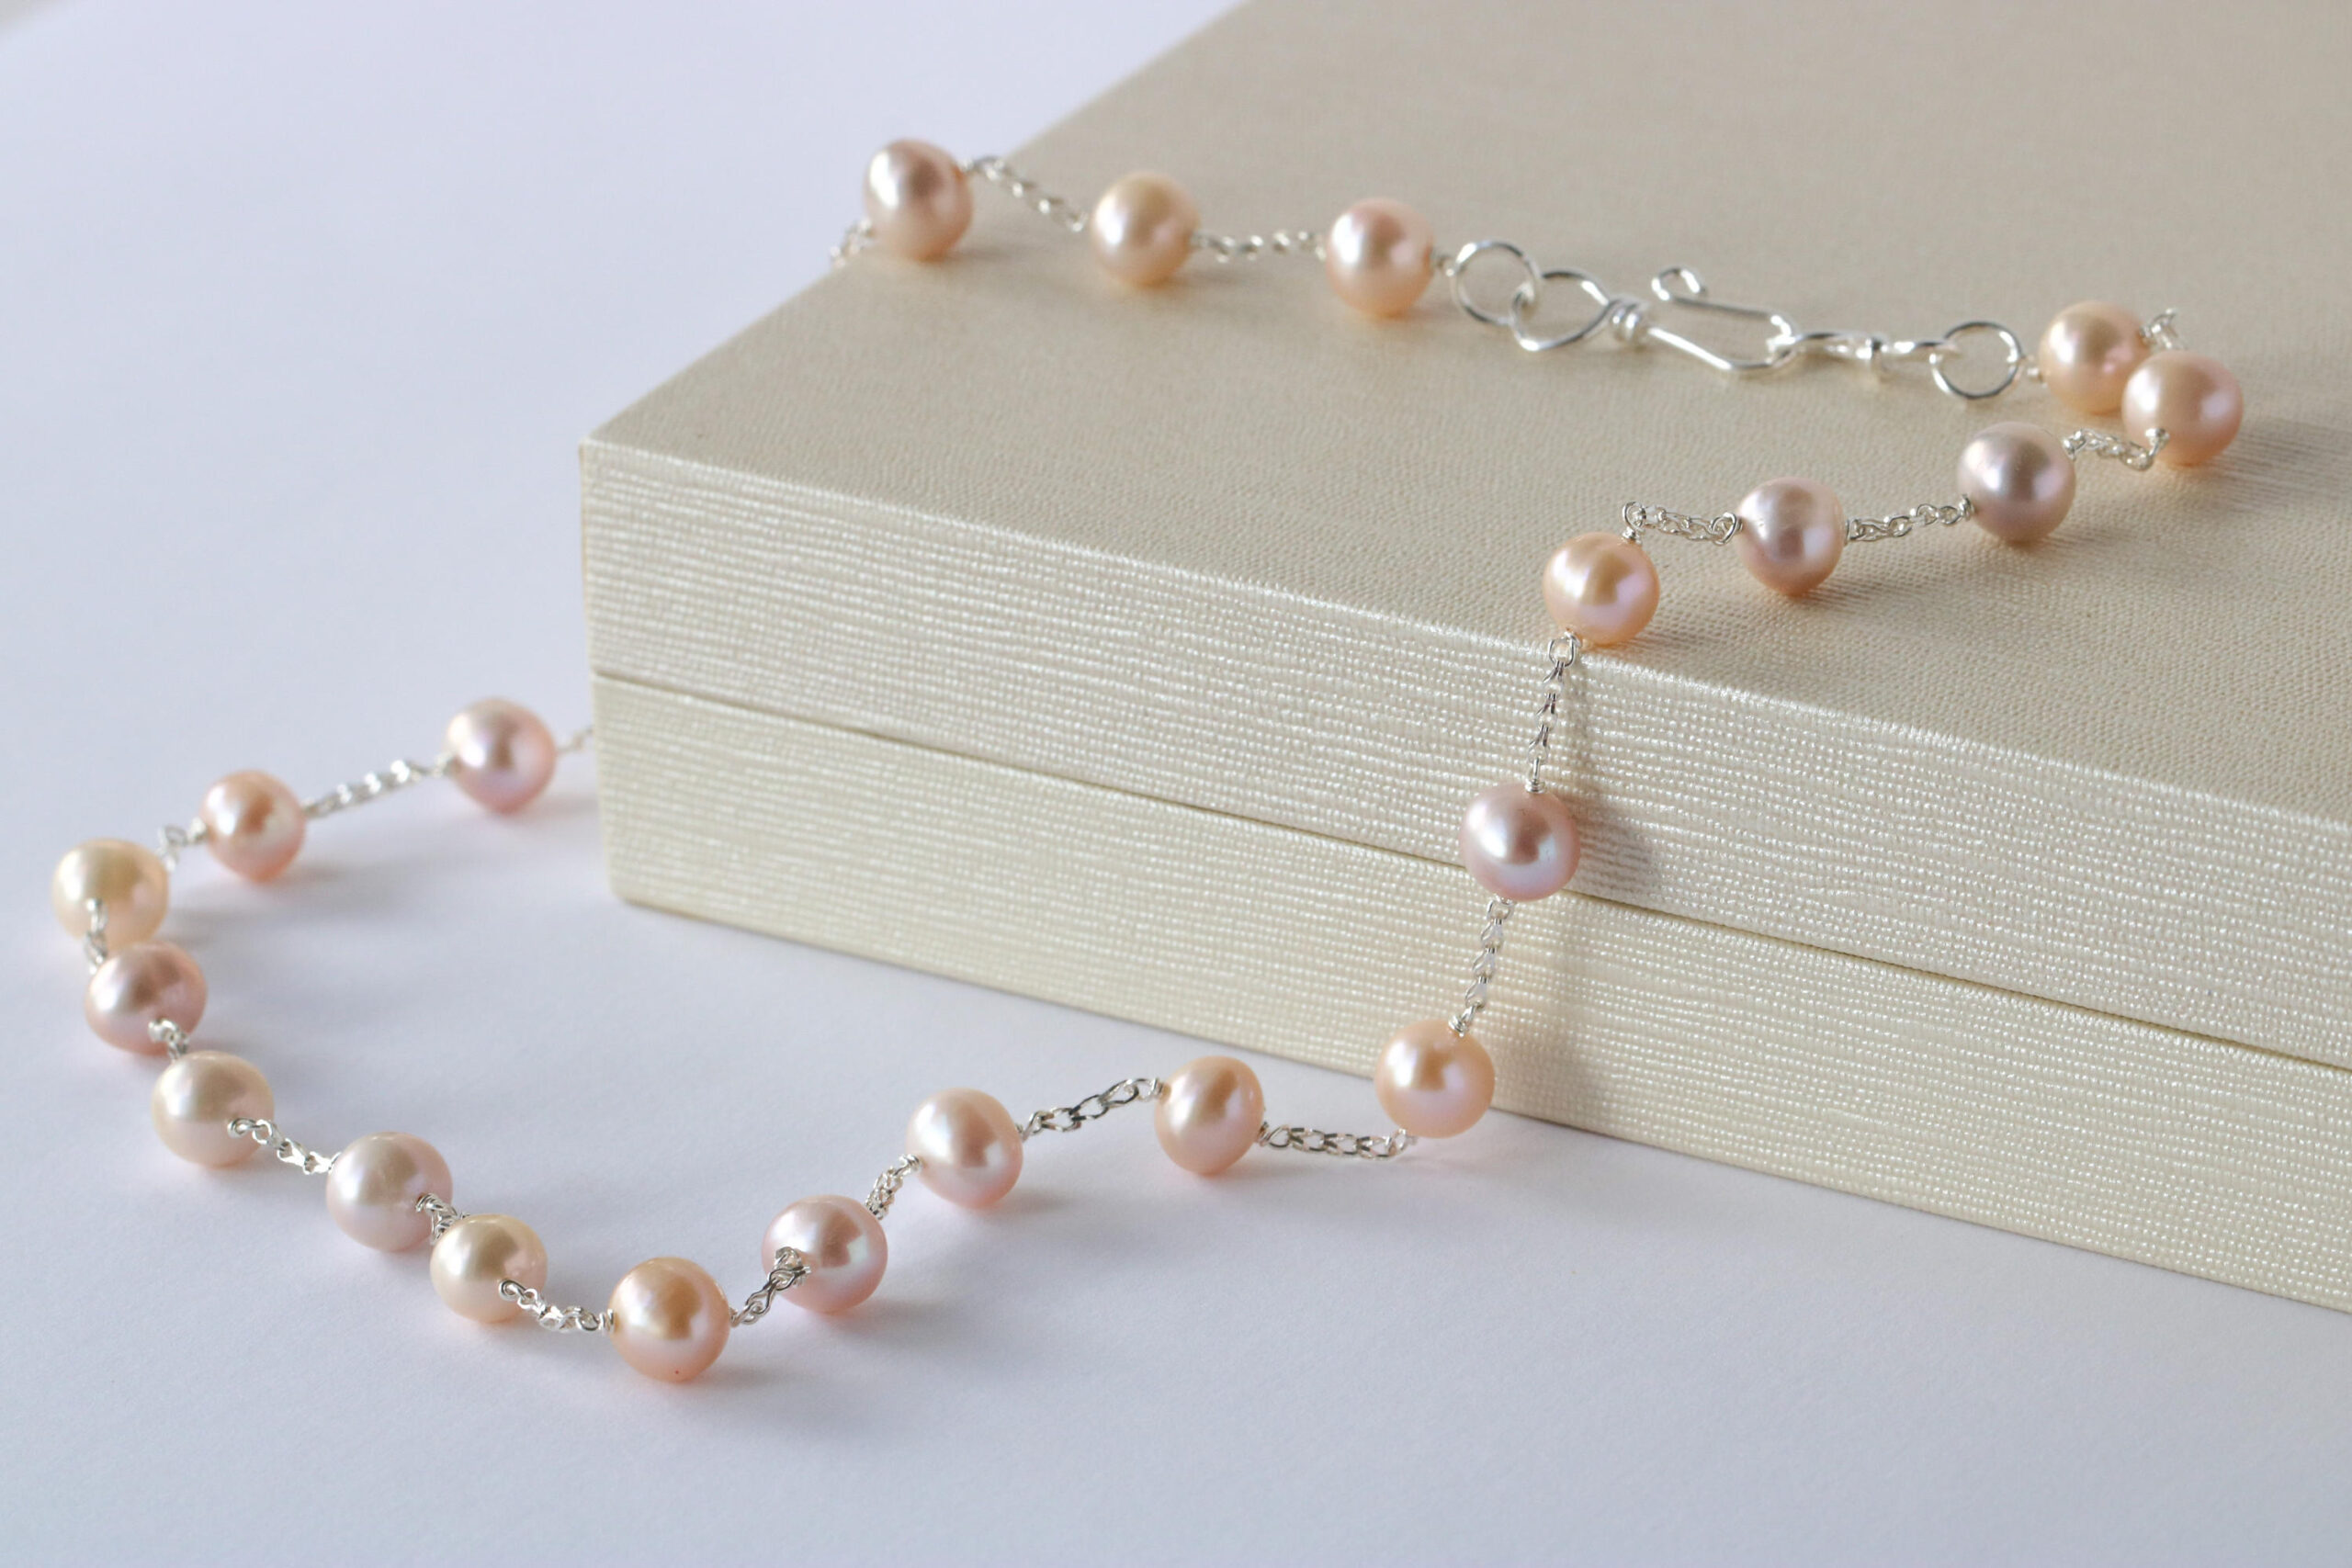 Peach and Mauve Pearl Necklace, Elegant Silver Bridal Necklace